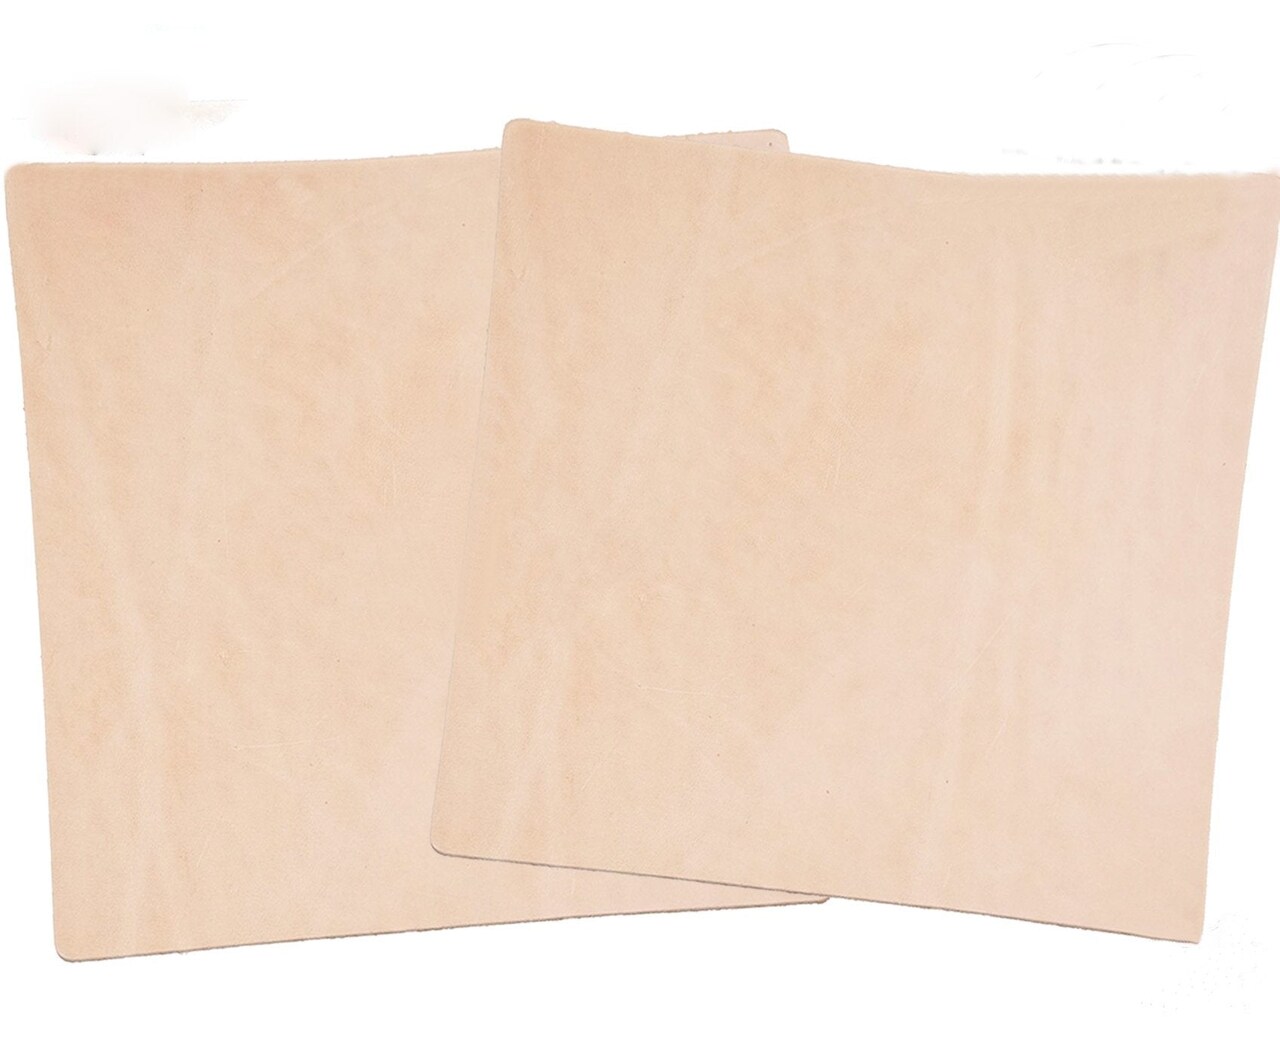 Veg Tan Tooling  Leather 2 Piece Special Price 5/6 oz (2-2.4mm) Thickness Pre-Cut Shapes 6&#x22; to 48&#x22; Import AA Grade Natural Cowhide Leathercraft, Molding, Holster, Armour, Projects, Repair, Lining